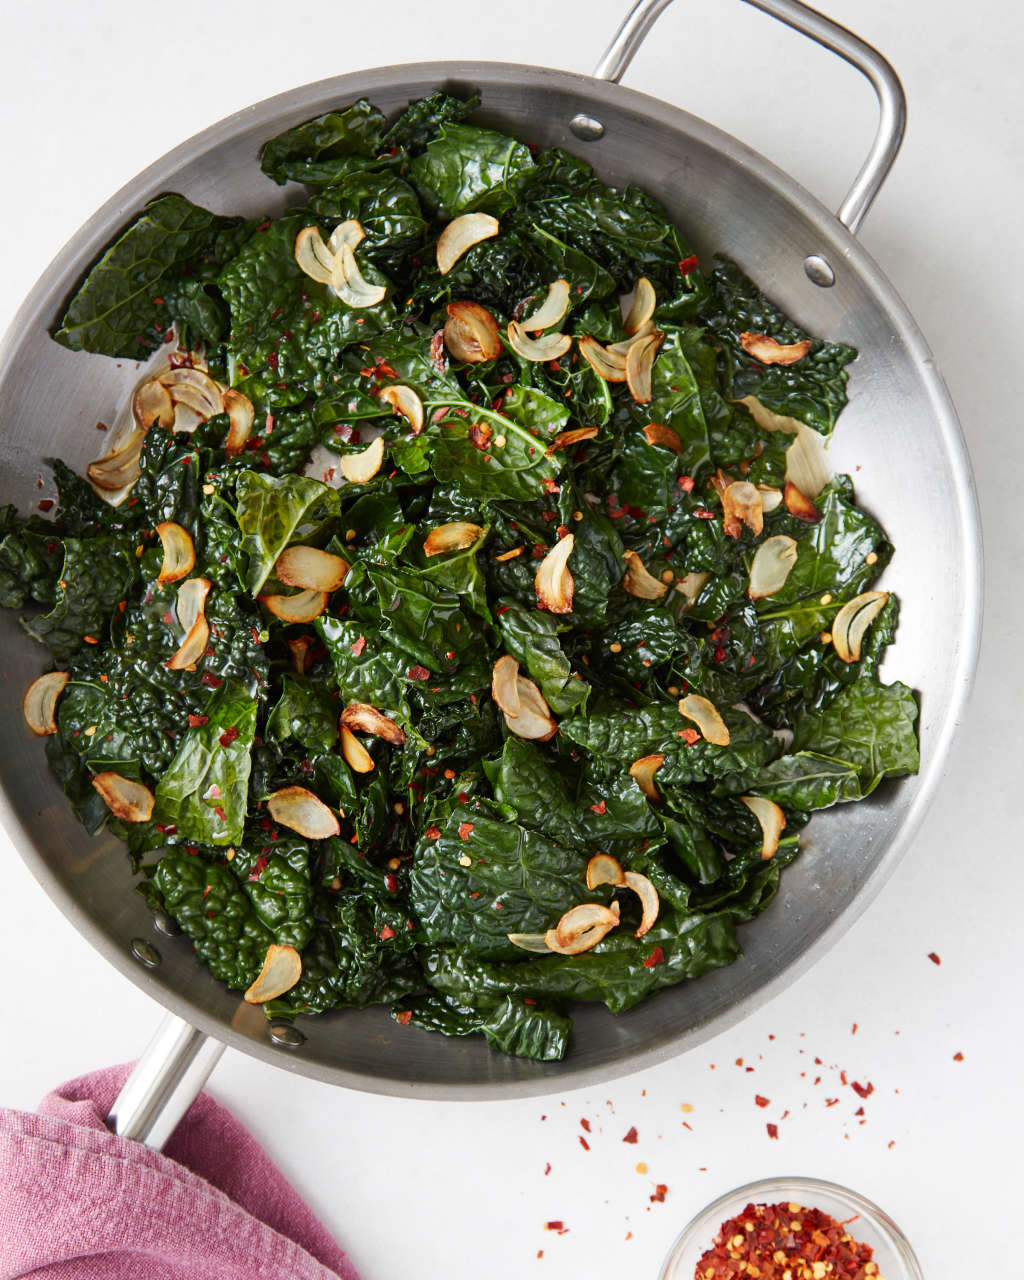 How To Cook Kale - Easy Sauteed Kale Recipe | Kitchn